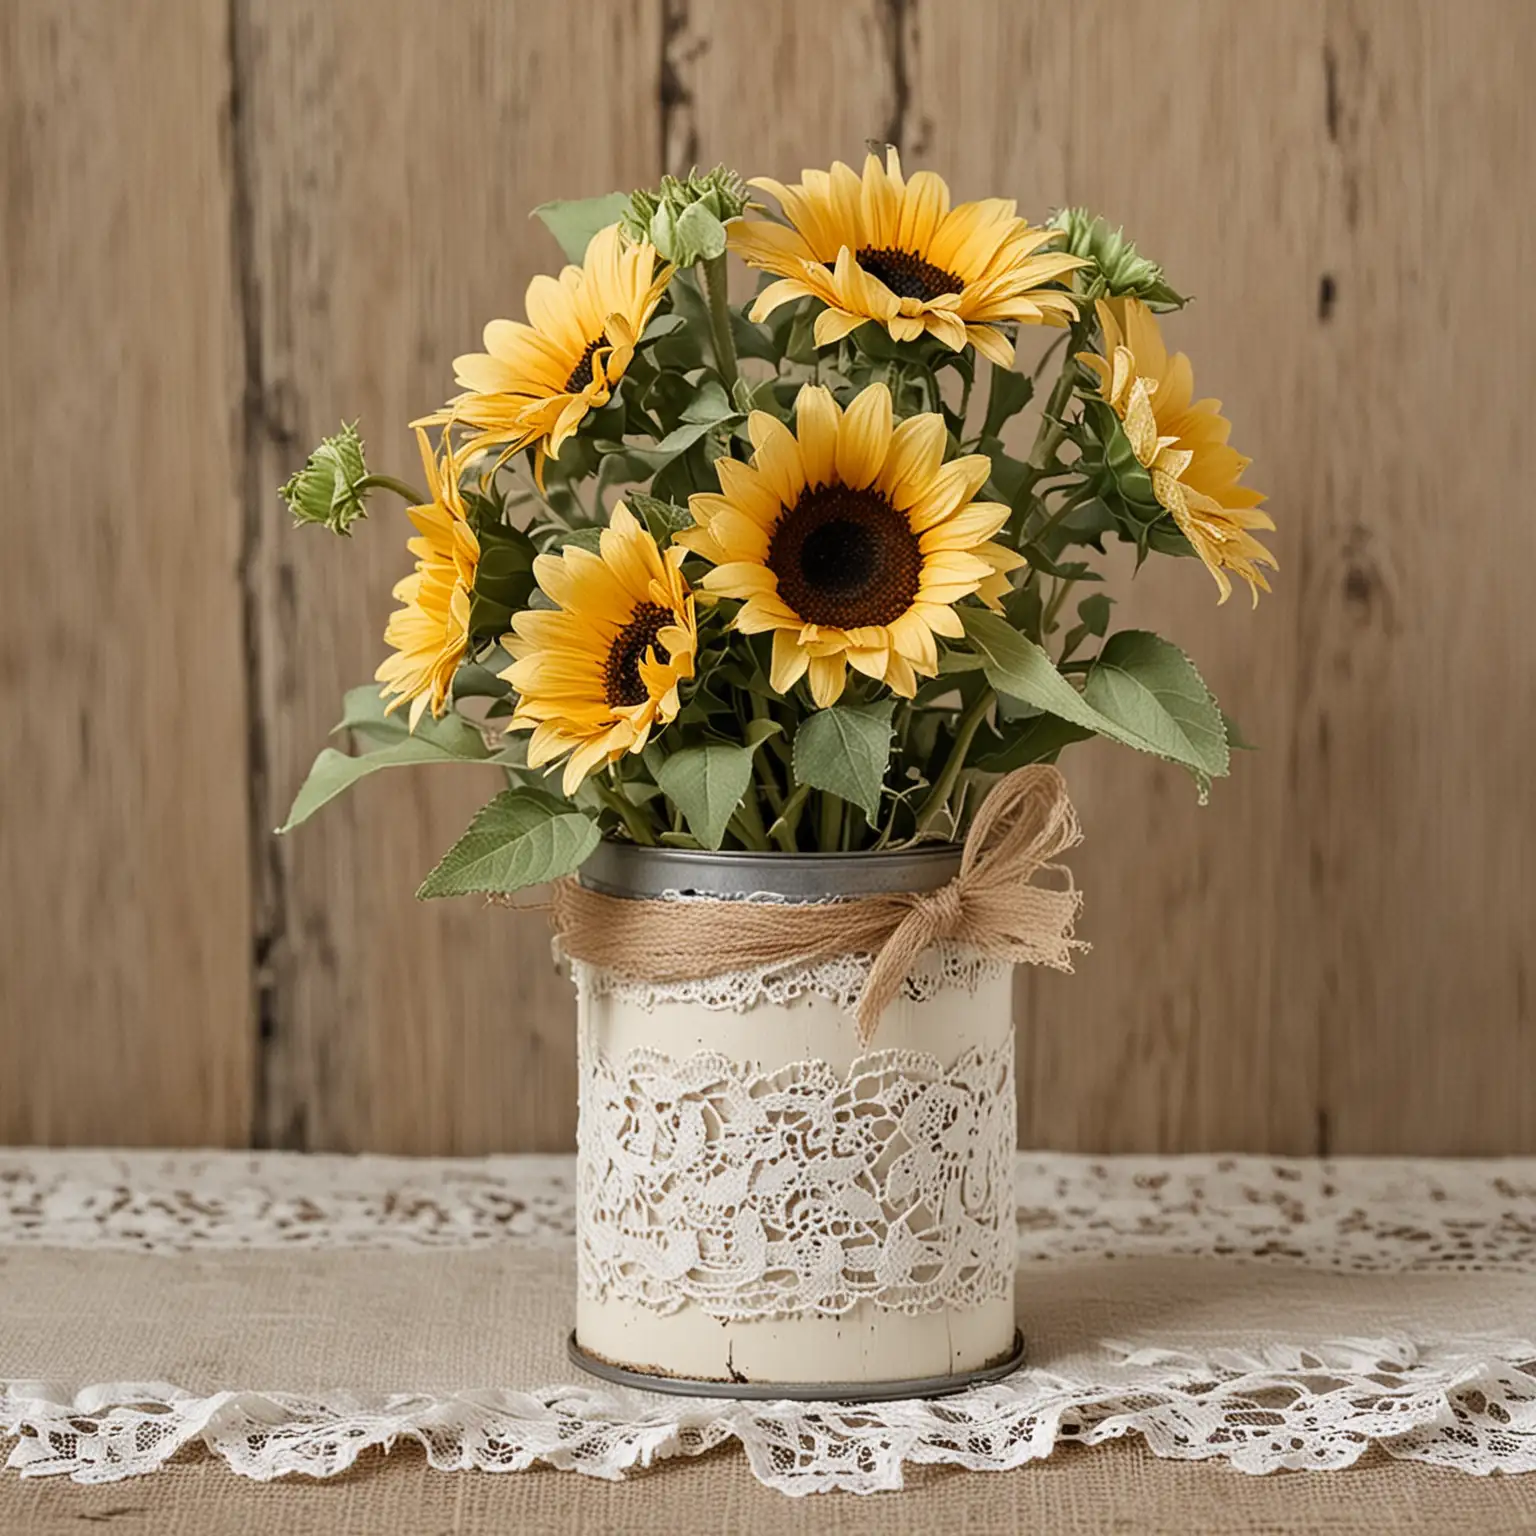 small and simple vintage centerpiece with tin can vase painted distressed ivory and embellished with lace holding a few small sunflowers